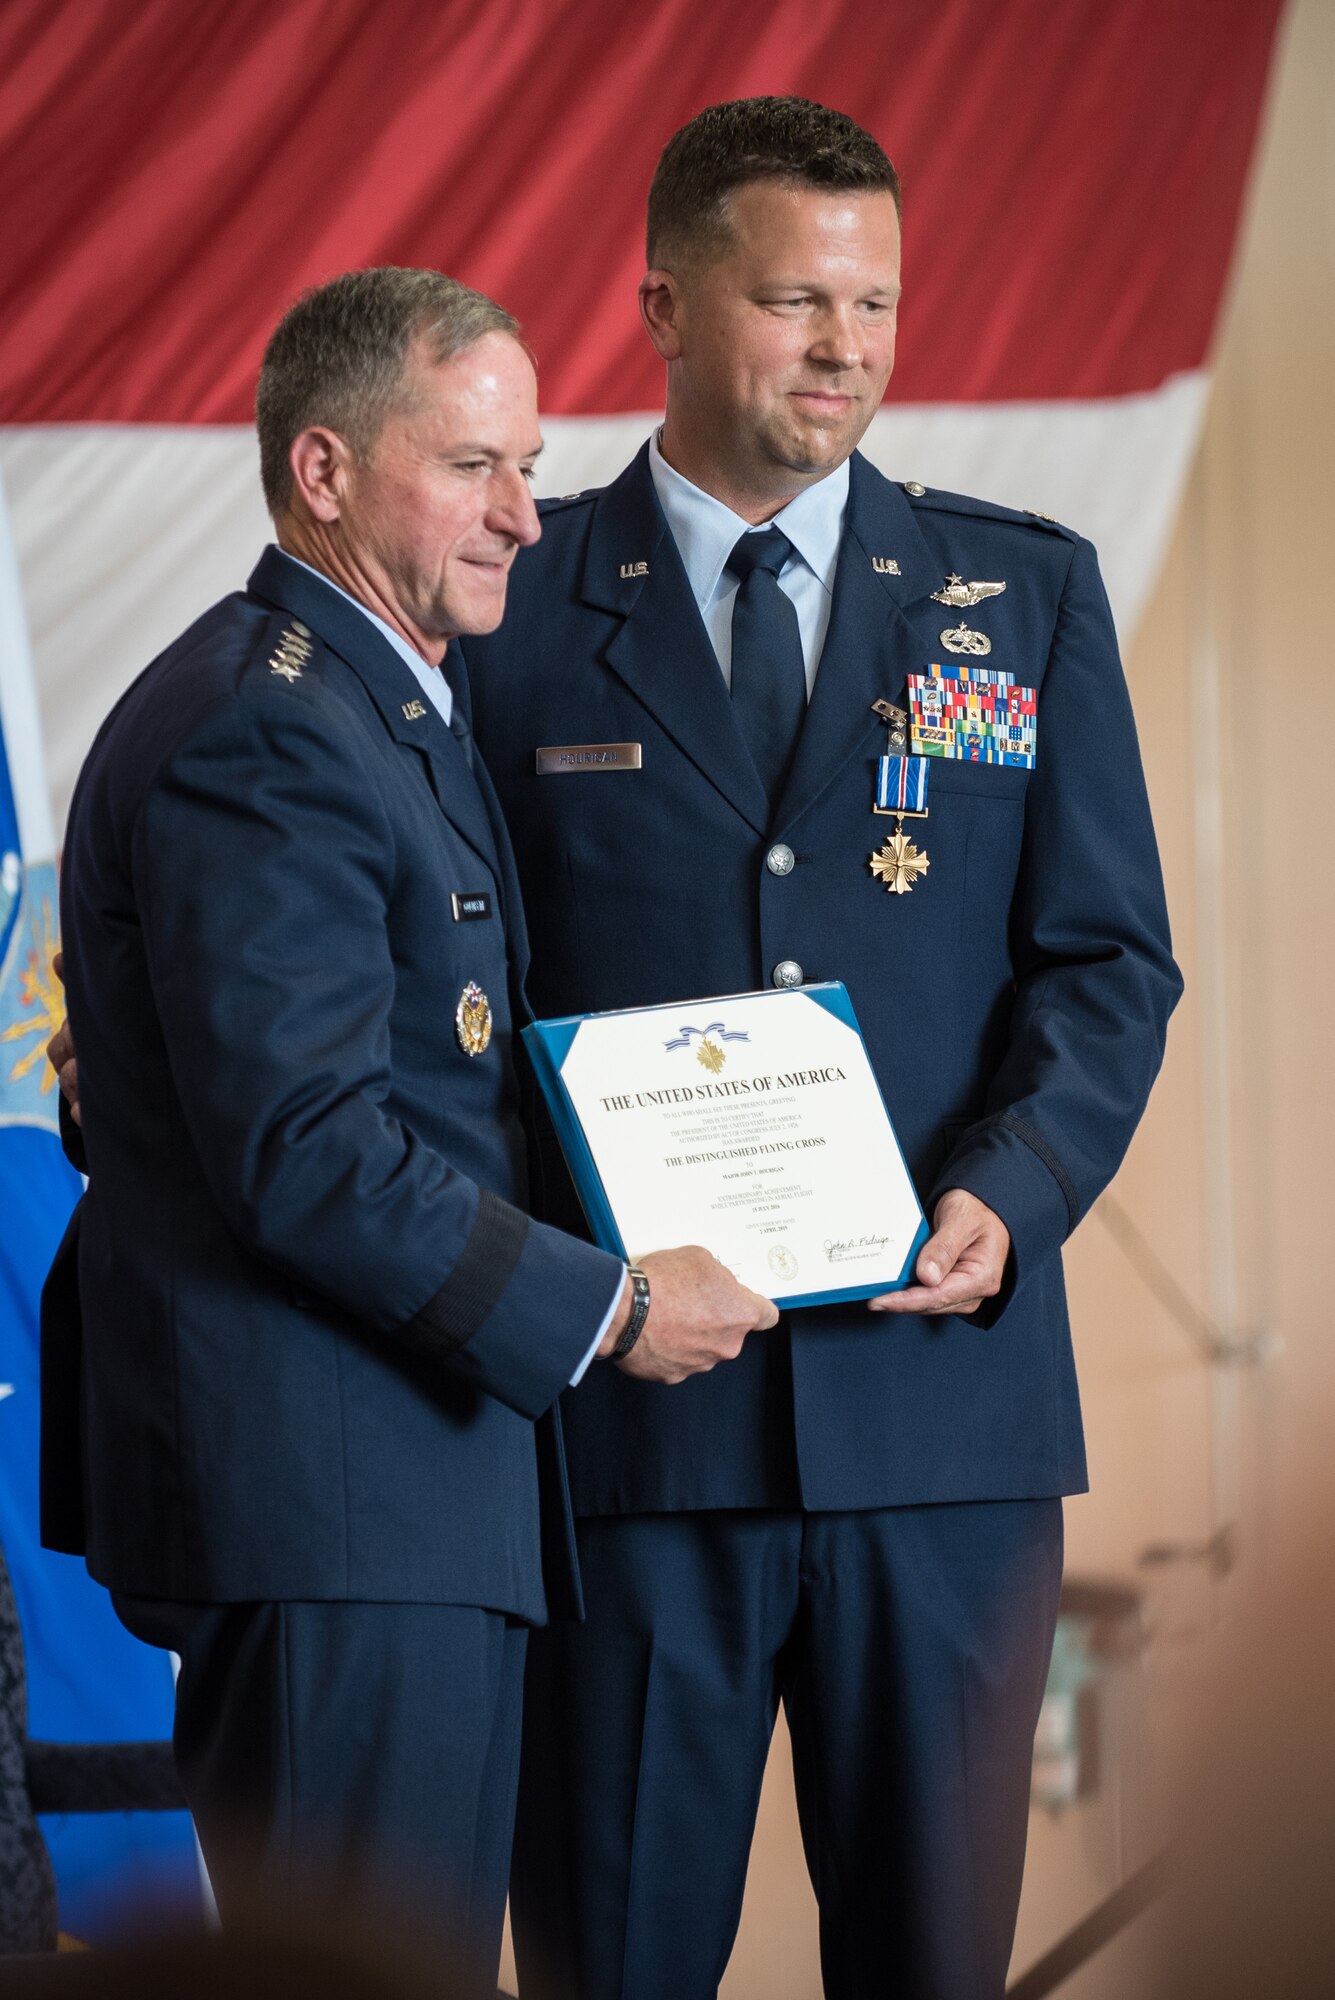 Air Force Chief of Staff Gen. David L. Goldfein (left) presents the Distinguished Flying Cross to Lt. Col. John "J.T." Hourigan, a pilot in the 123rd Airlift Wing, during a ceremony the Kentucky Air National Guard Base in Louisville, Ky., Aug. 10, 2019. Hourigan earned the medal for decisive action following a catastrophic mechanical failure while flying a C-130 Hercules during a routine training sortie, saving the lives of six crew members and a $30 million aircraft. (U.S. Air National Guard photo by Lt. Col. Dale Greer)